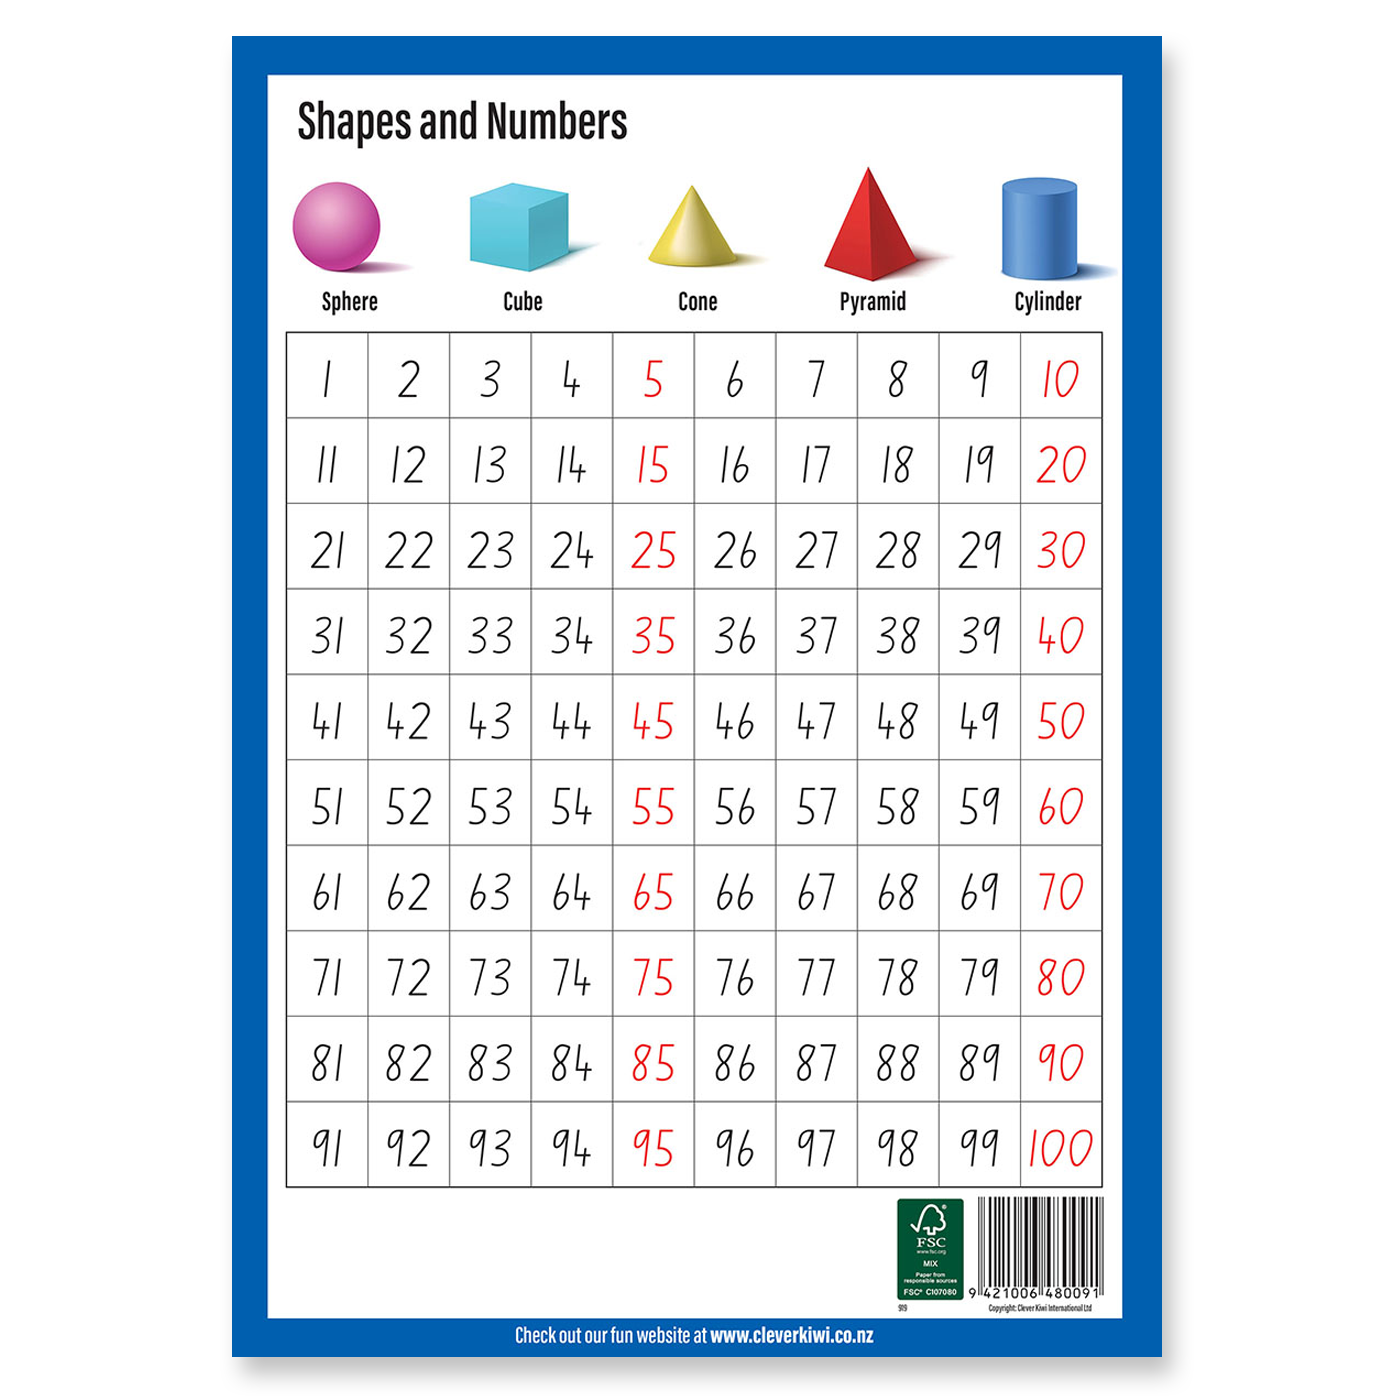 Clever Kiwi Fun Doing Maths Book 1 - Shapes and Numbers